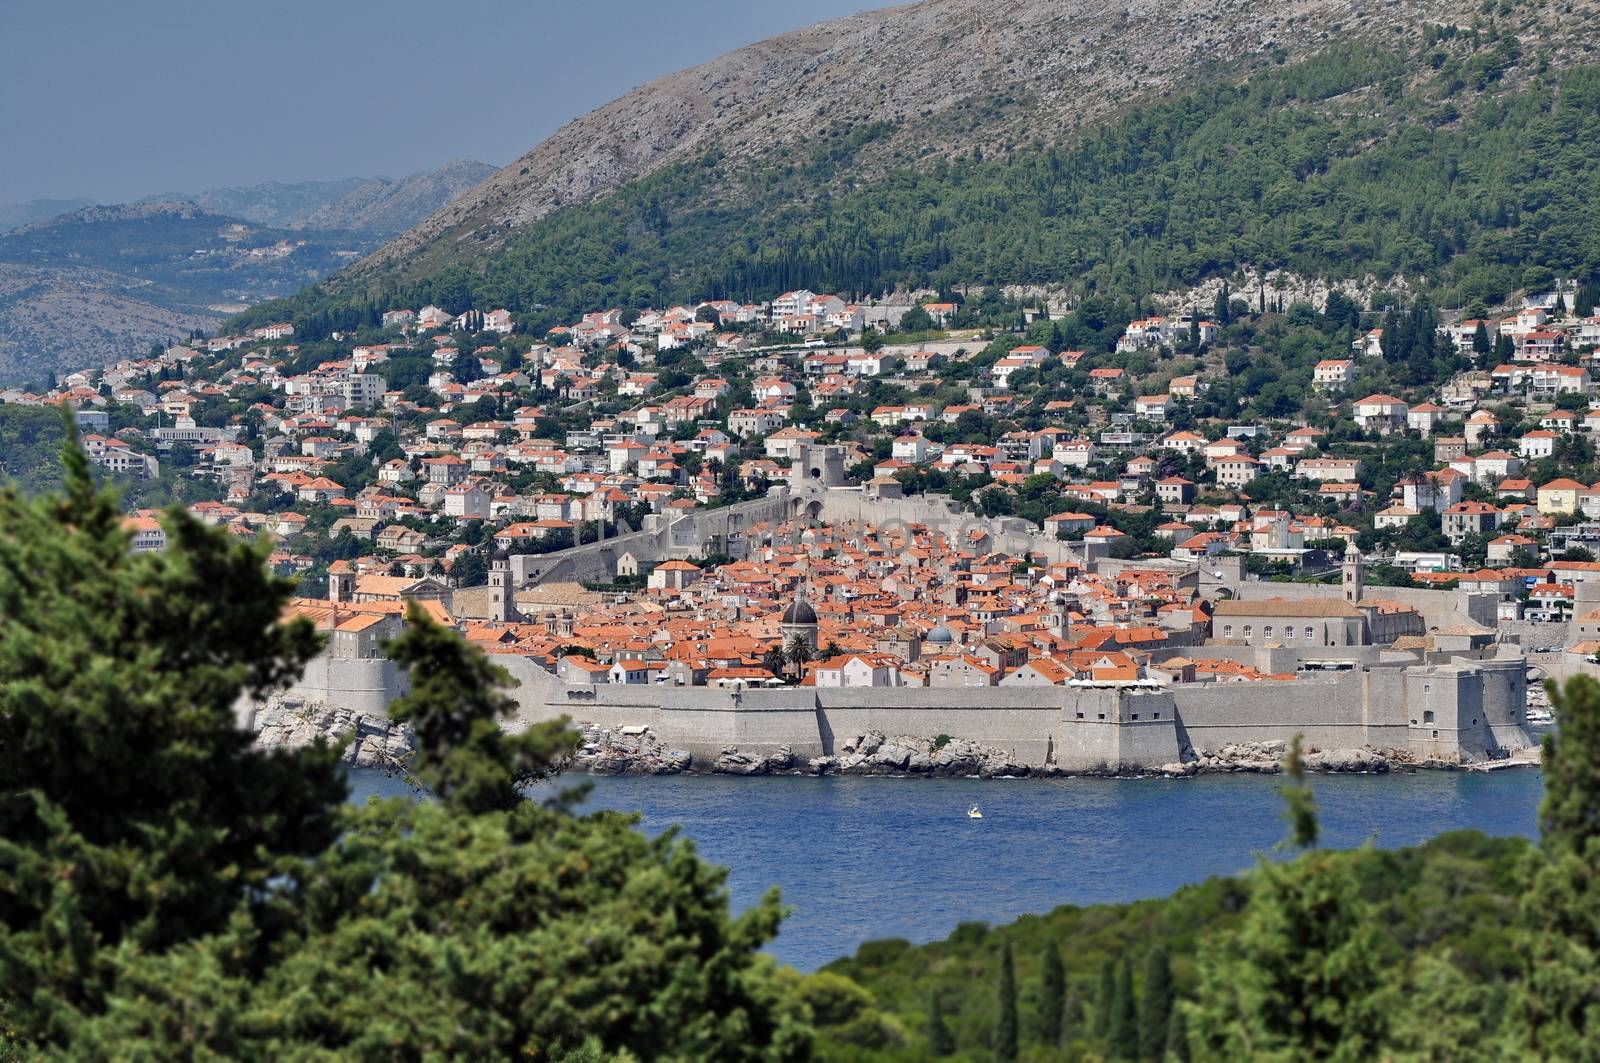 City of Dubrovnik from Lokrum Island by anderm